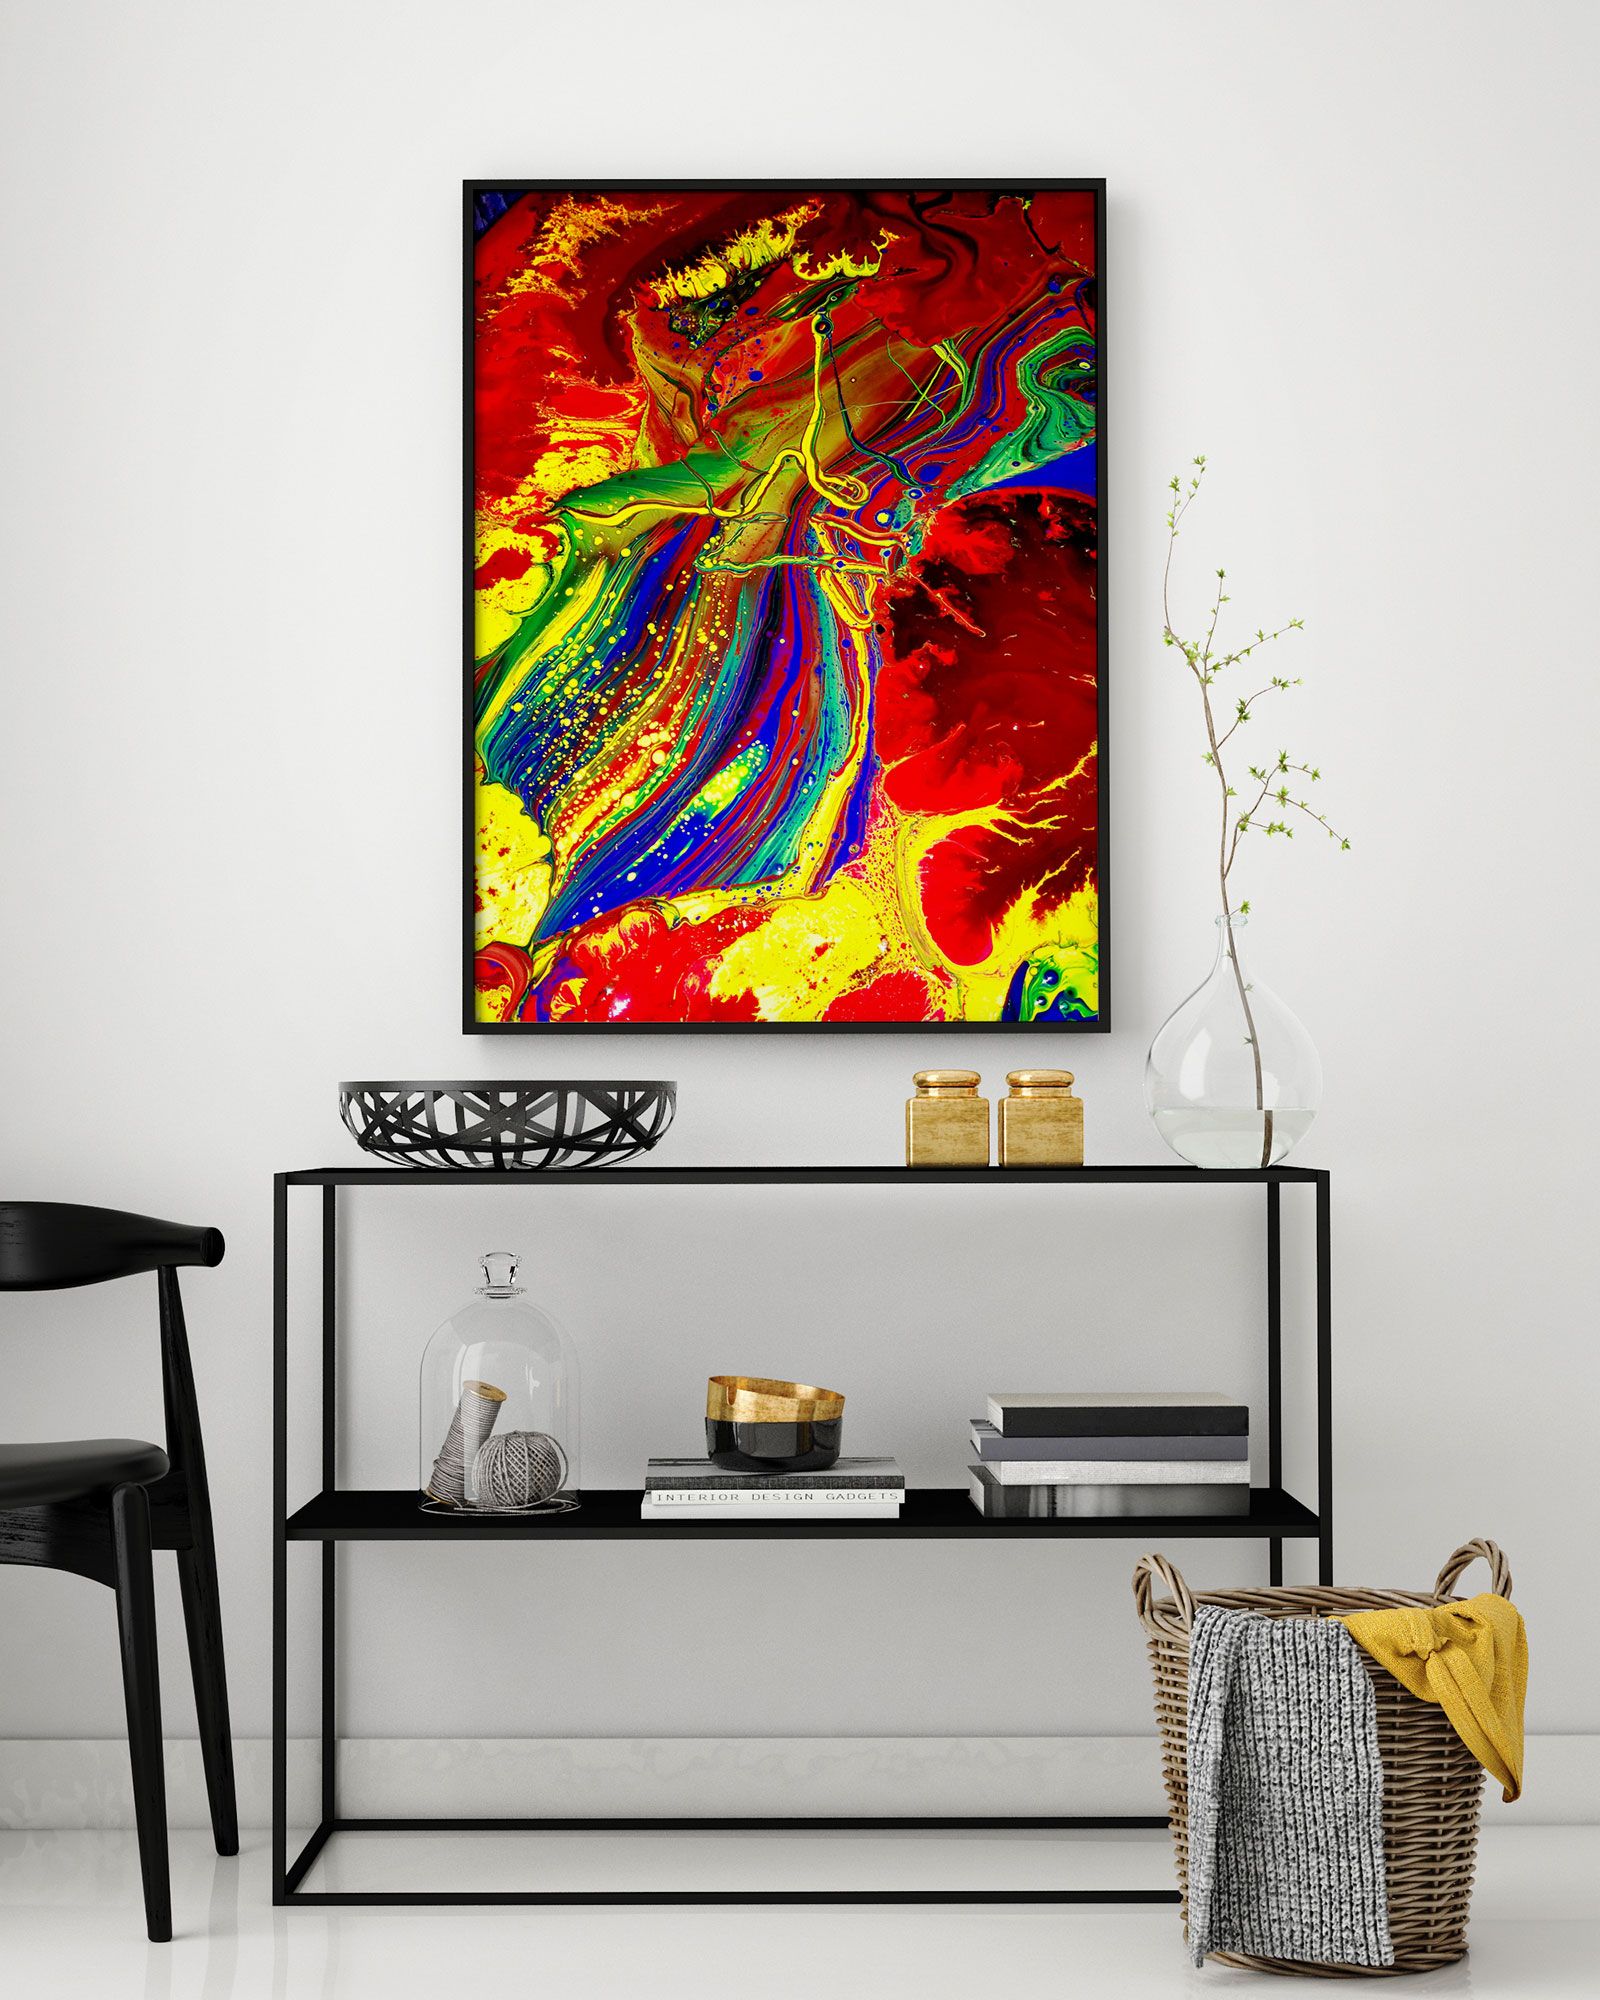 One-of-a-kind, limited edition Ink Waste Art prints.